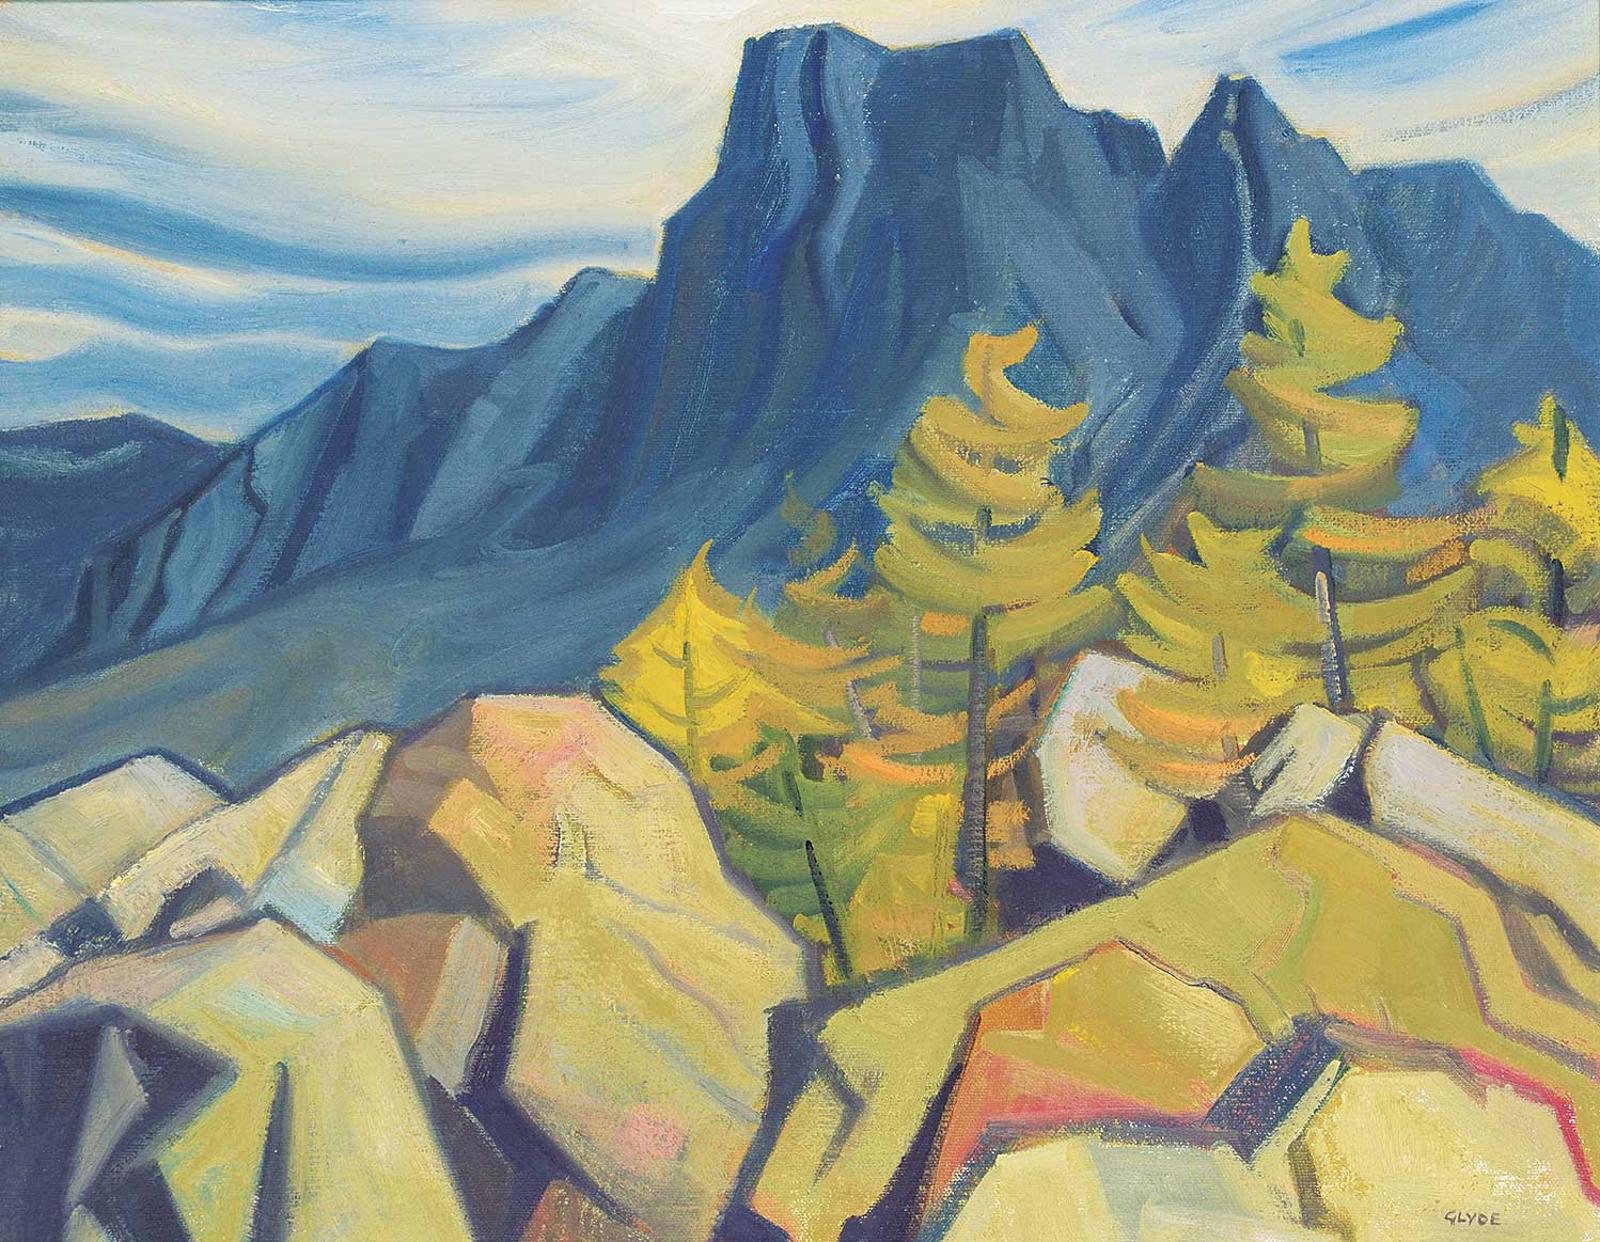 Henry George Glyde (1906-1998) - Above Emerald Lake, Canadian Rockies